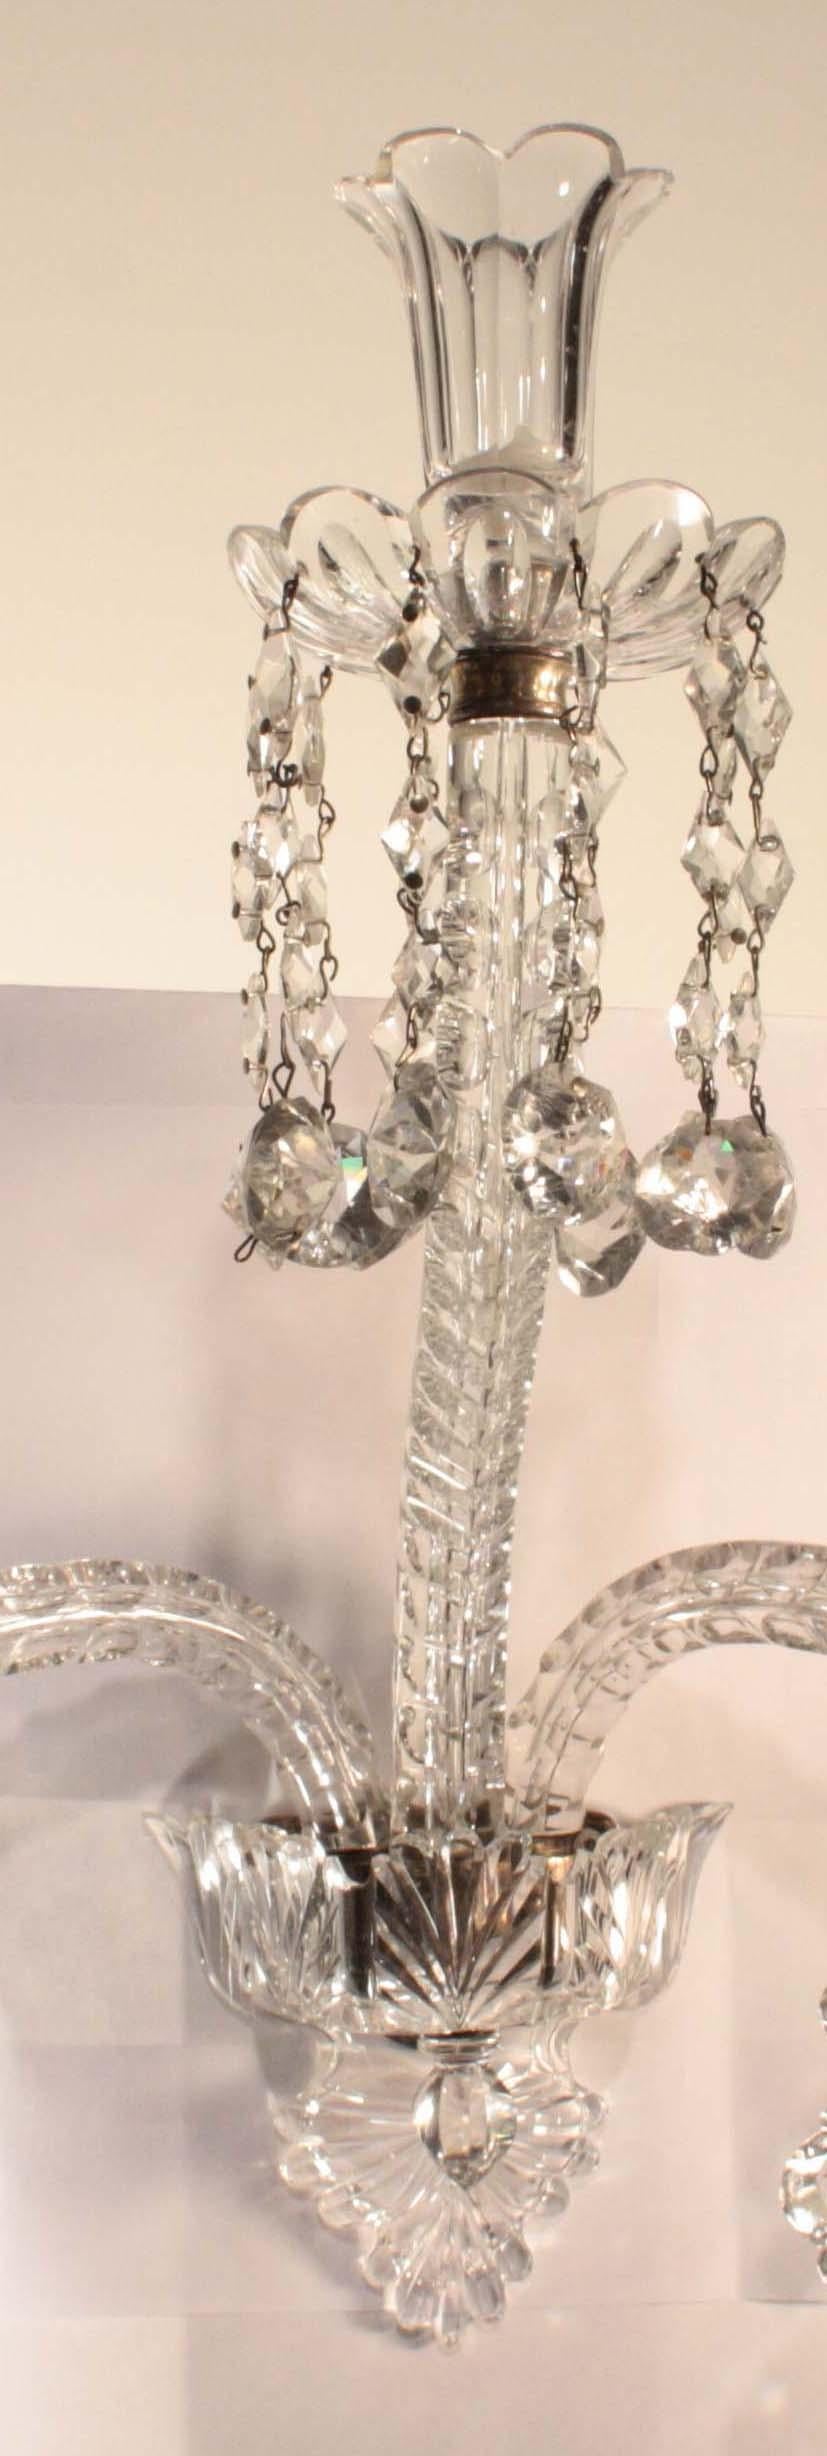 George III F&C Osler, a Pair of Lead Crystal Wall Sconces For Sale